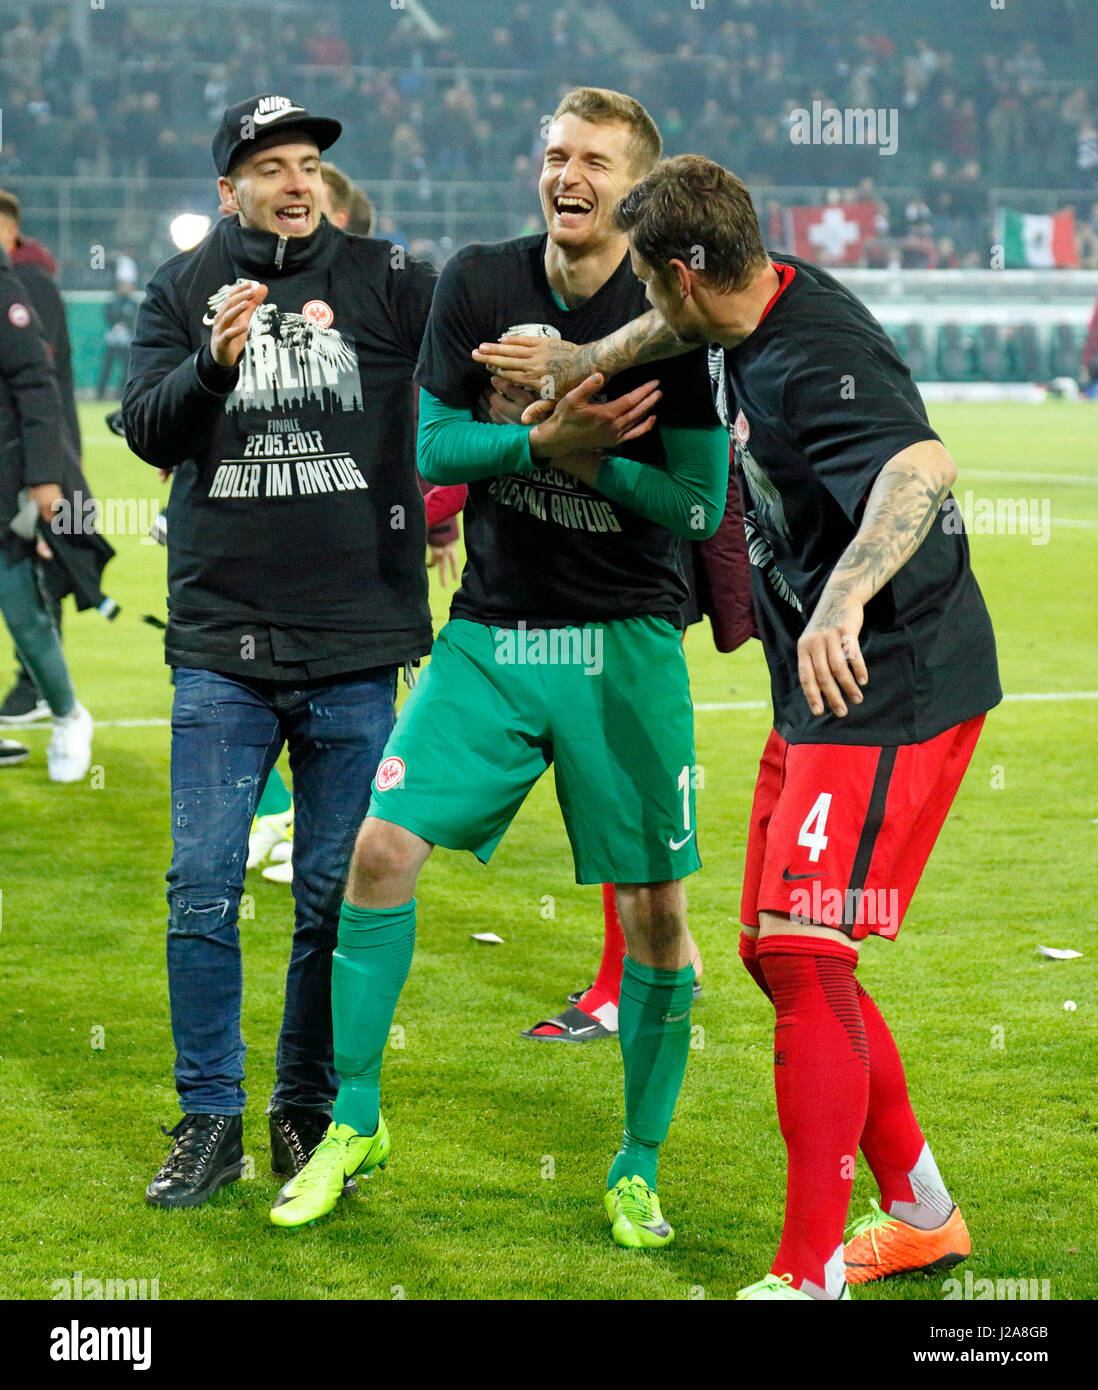 sports, football, DFB Cup, 2016/2017, Round 5, semifinal, Borussia Moenchengladbach vs Eintracht Frankfurt 7:8 on penalties, Stadium Borussia Park, Frankfurt players rejoicing at the win and the entry to the DFB Cup final 2017 in Berlin, keeper Lukas Hradecky (Frankfurt) and Marco Russ (Frankfurt) right Stock Photo